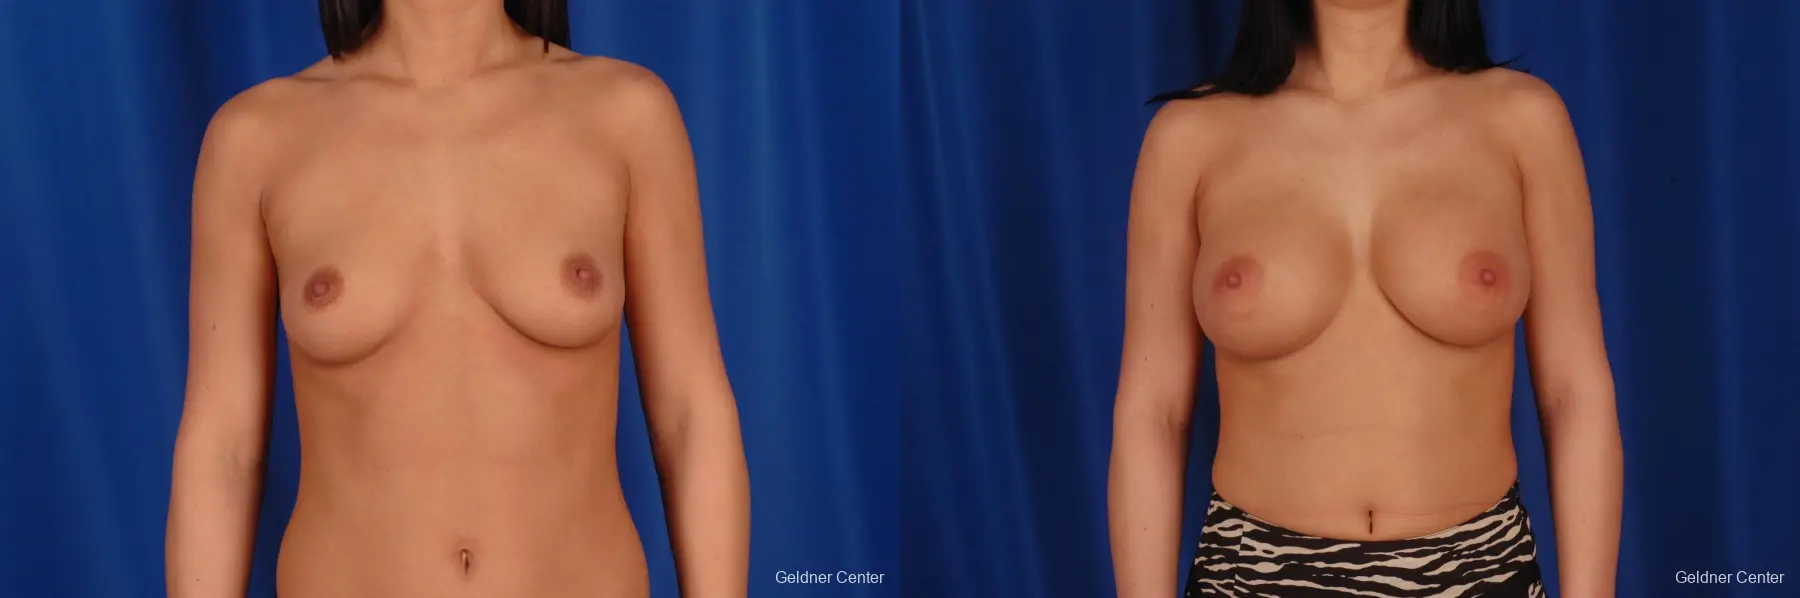 Breast Augmentation Lake Shore Dr, Chicago 2402 - Before and After 1